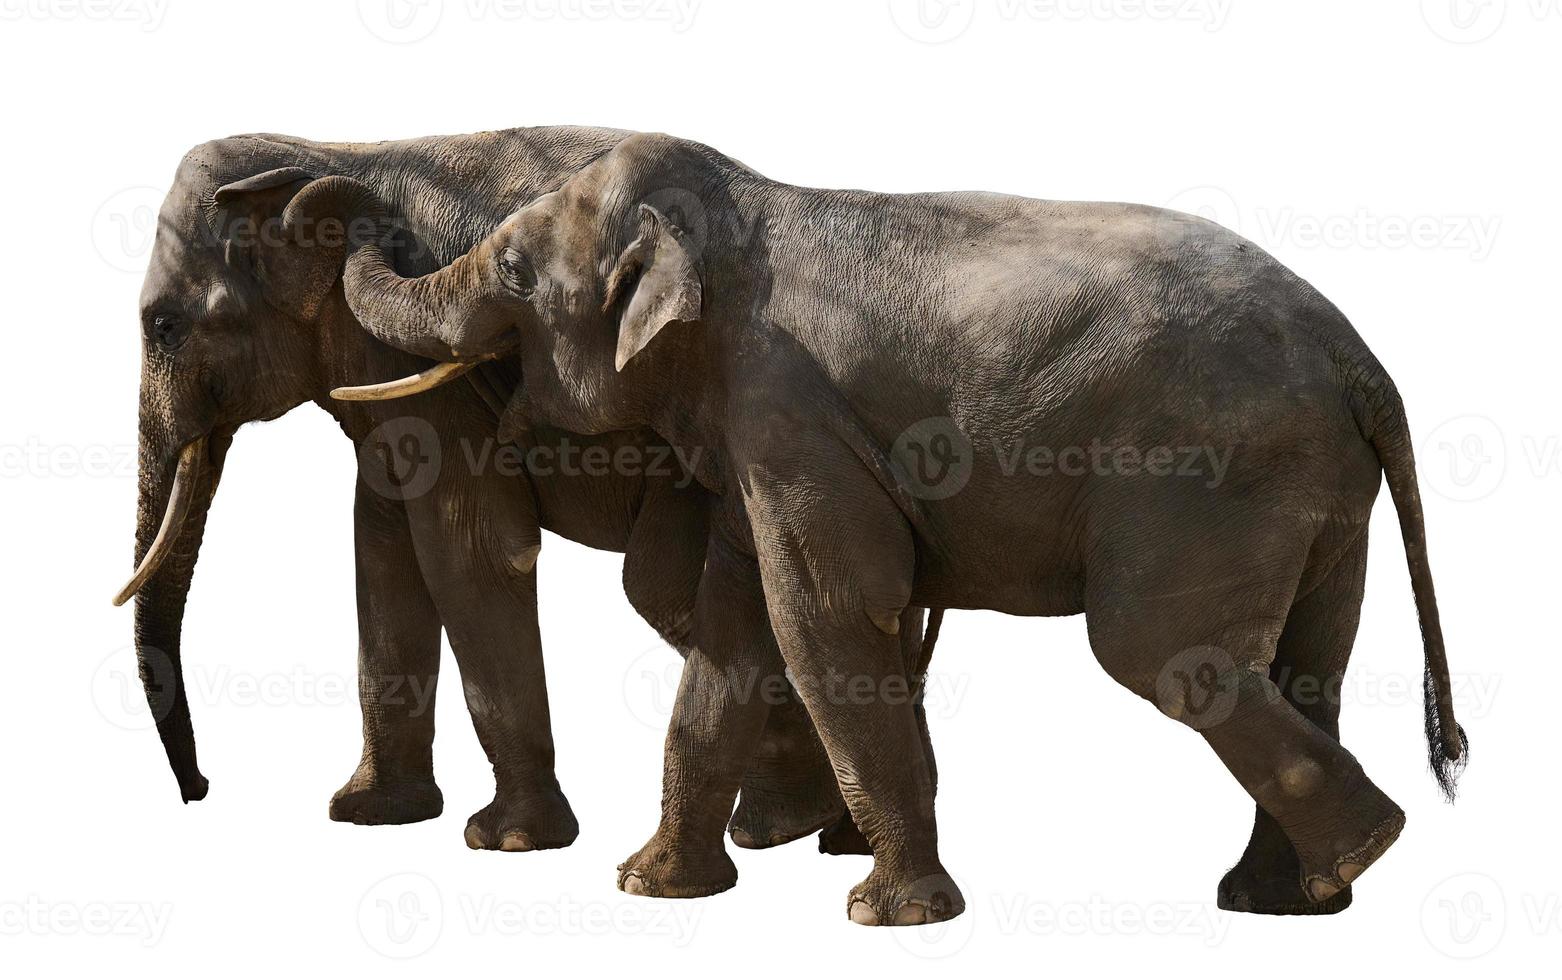 Two adult elephants walk next to each other, animals are isolated on a white background photo